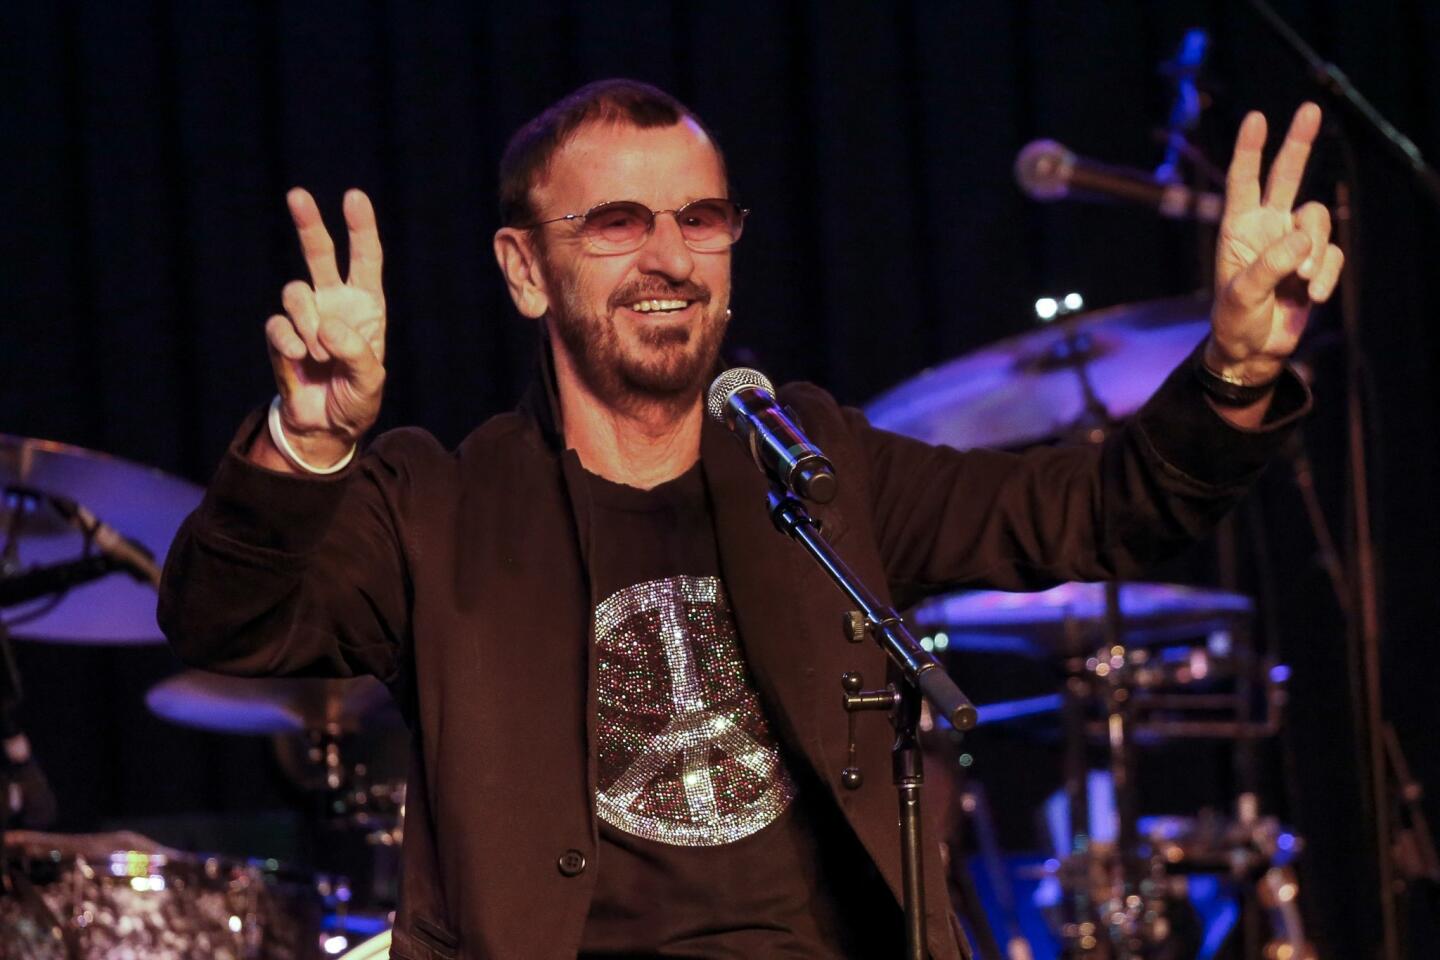 Ringo Starr performs in Hollywood as part of an intimate Wednesday event tied to his new book "Photograph," which includes images from throughout his life, including, yes, his years in the Beatles.